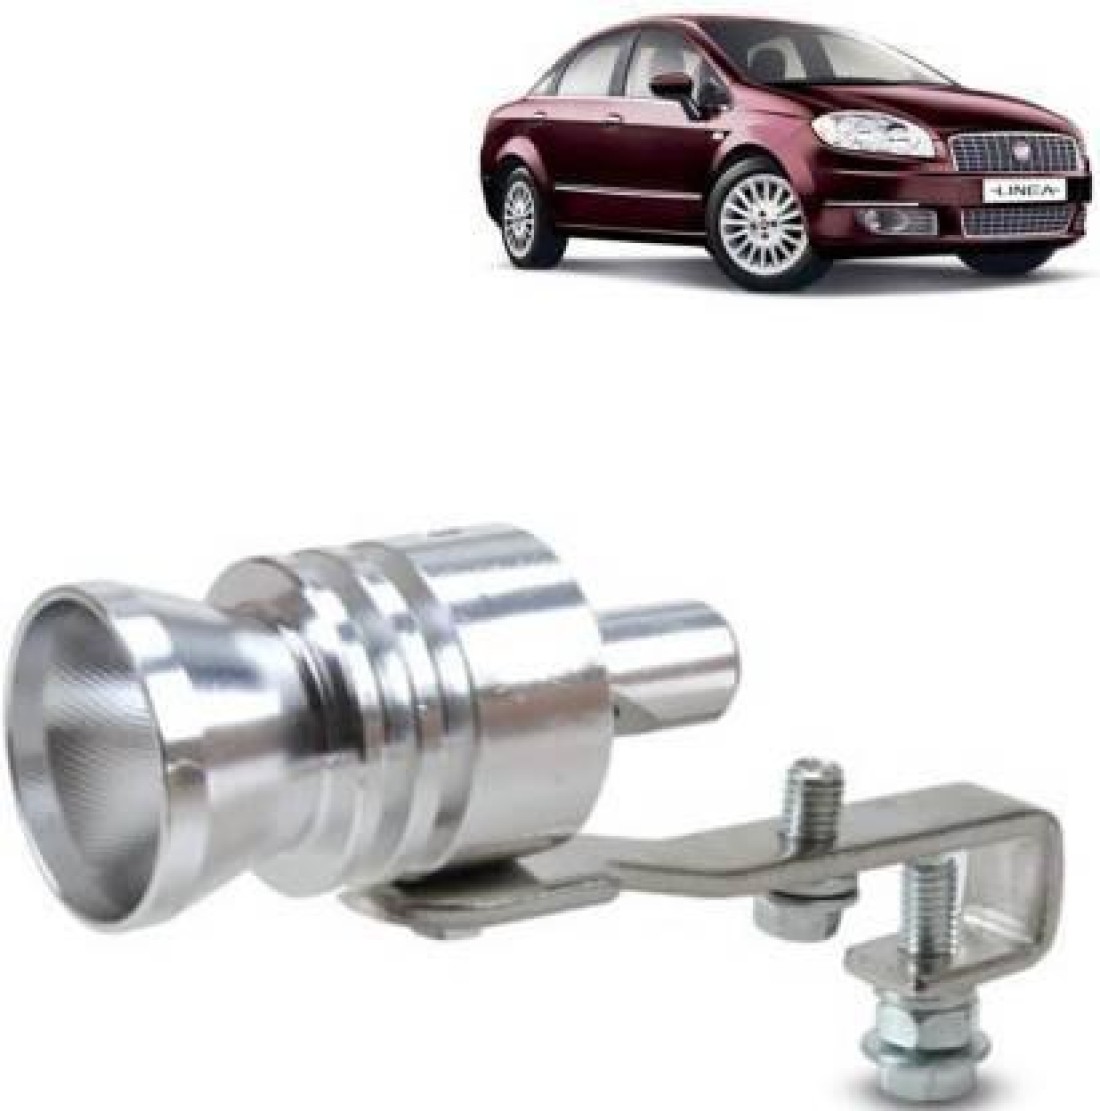 Getsocio Turbo Sound Car Silencer Whistle For Linea Car Silencer Price in  India - Buy Getsocio Turbo Sound Car Silencer Whistle For Linea Car Silencer  online at